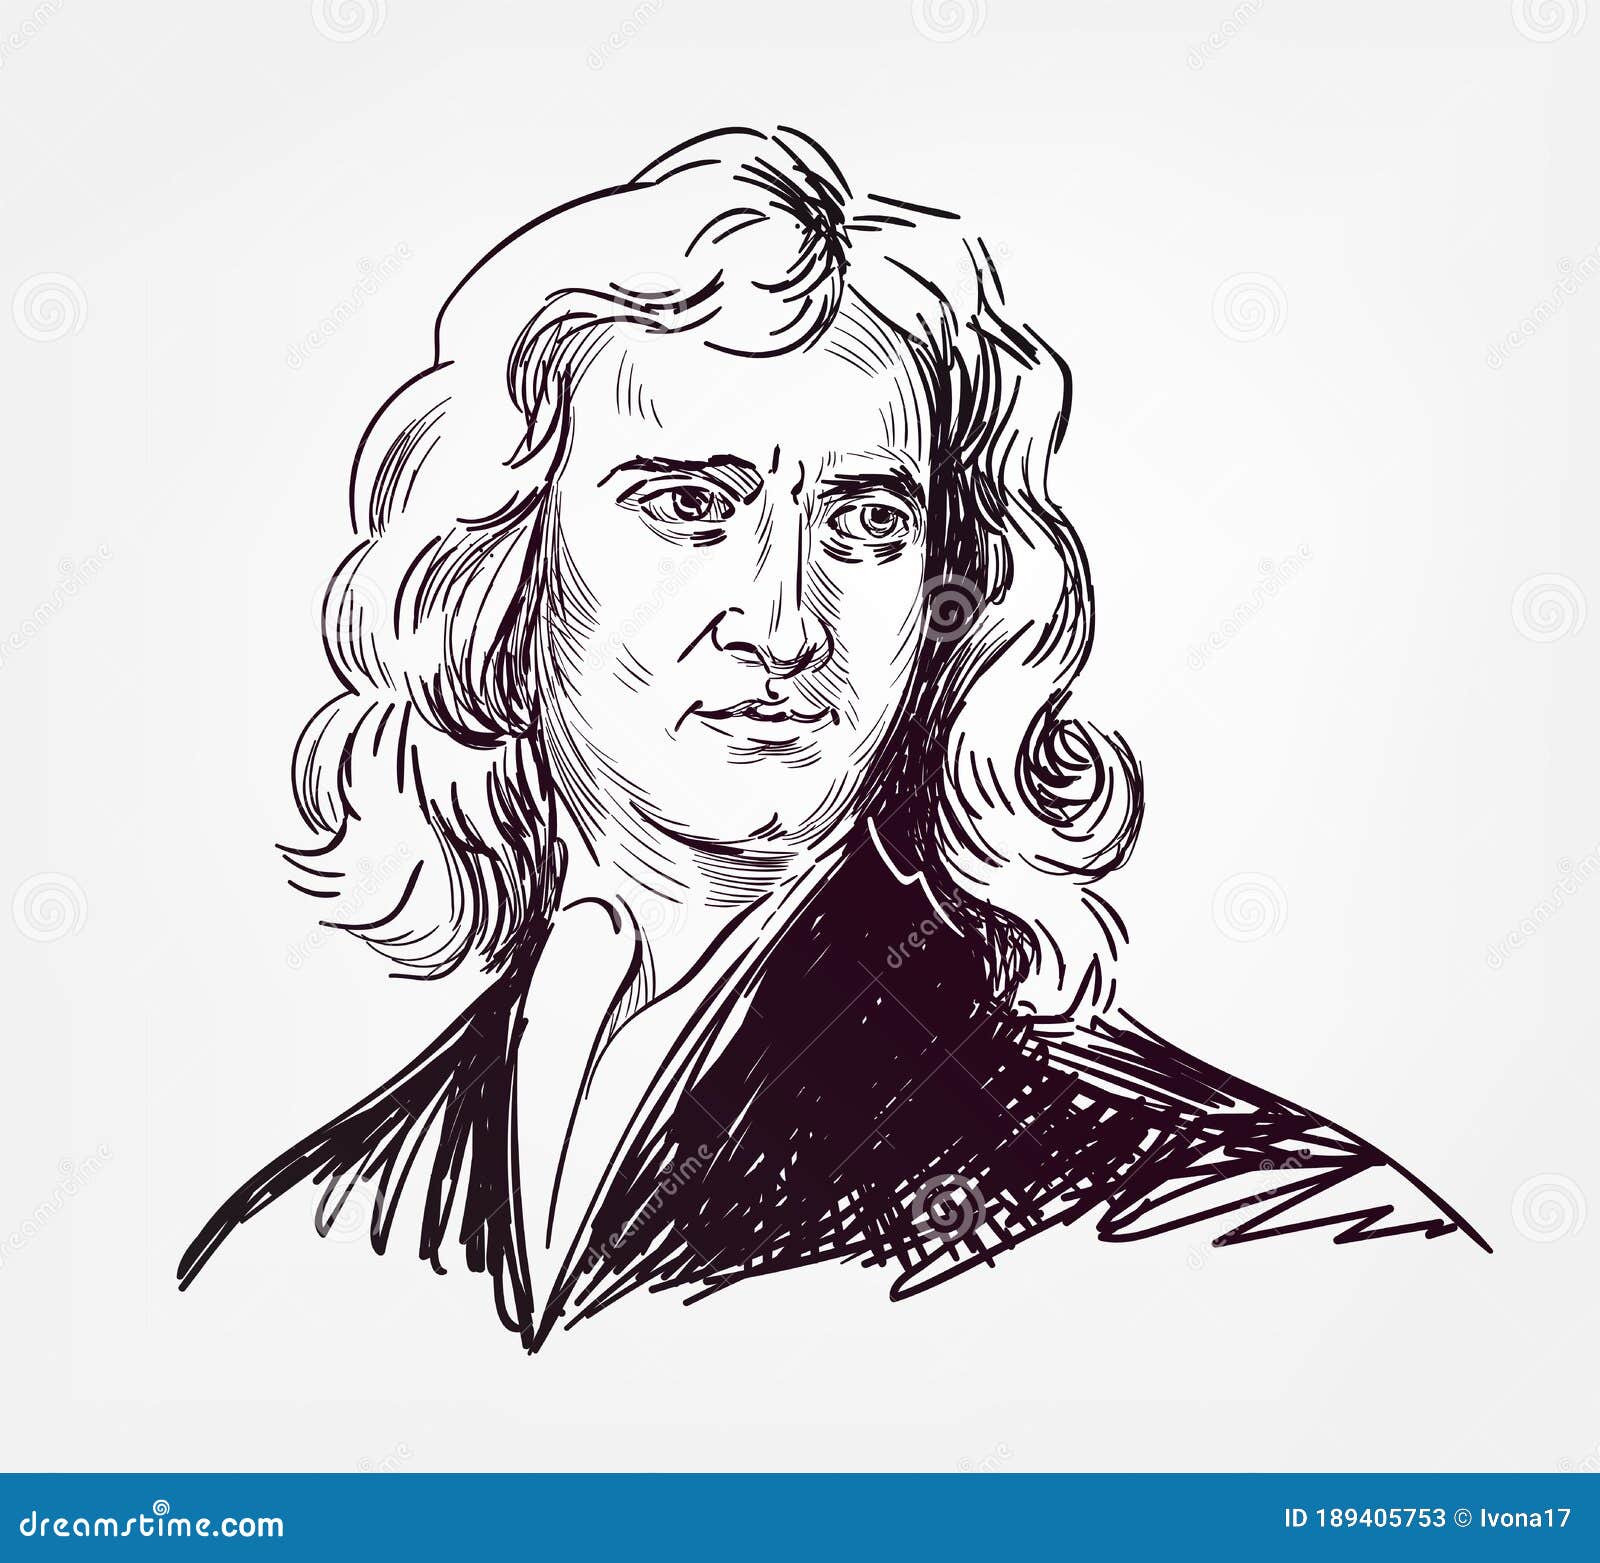 Isaac Newton Vector Images over 190